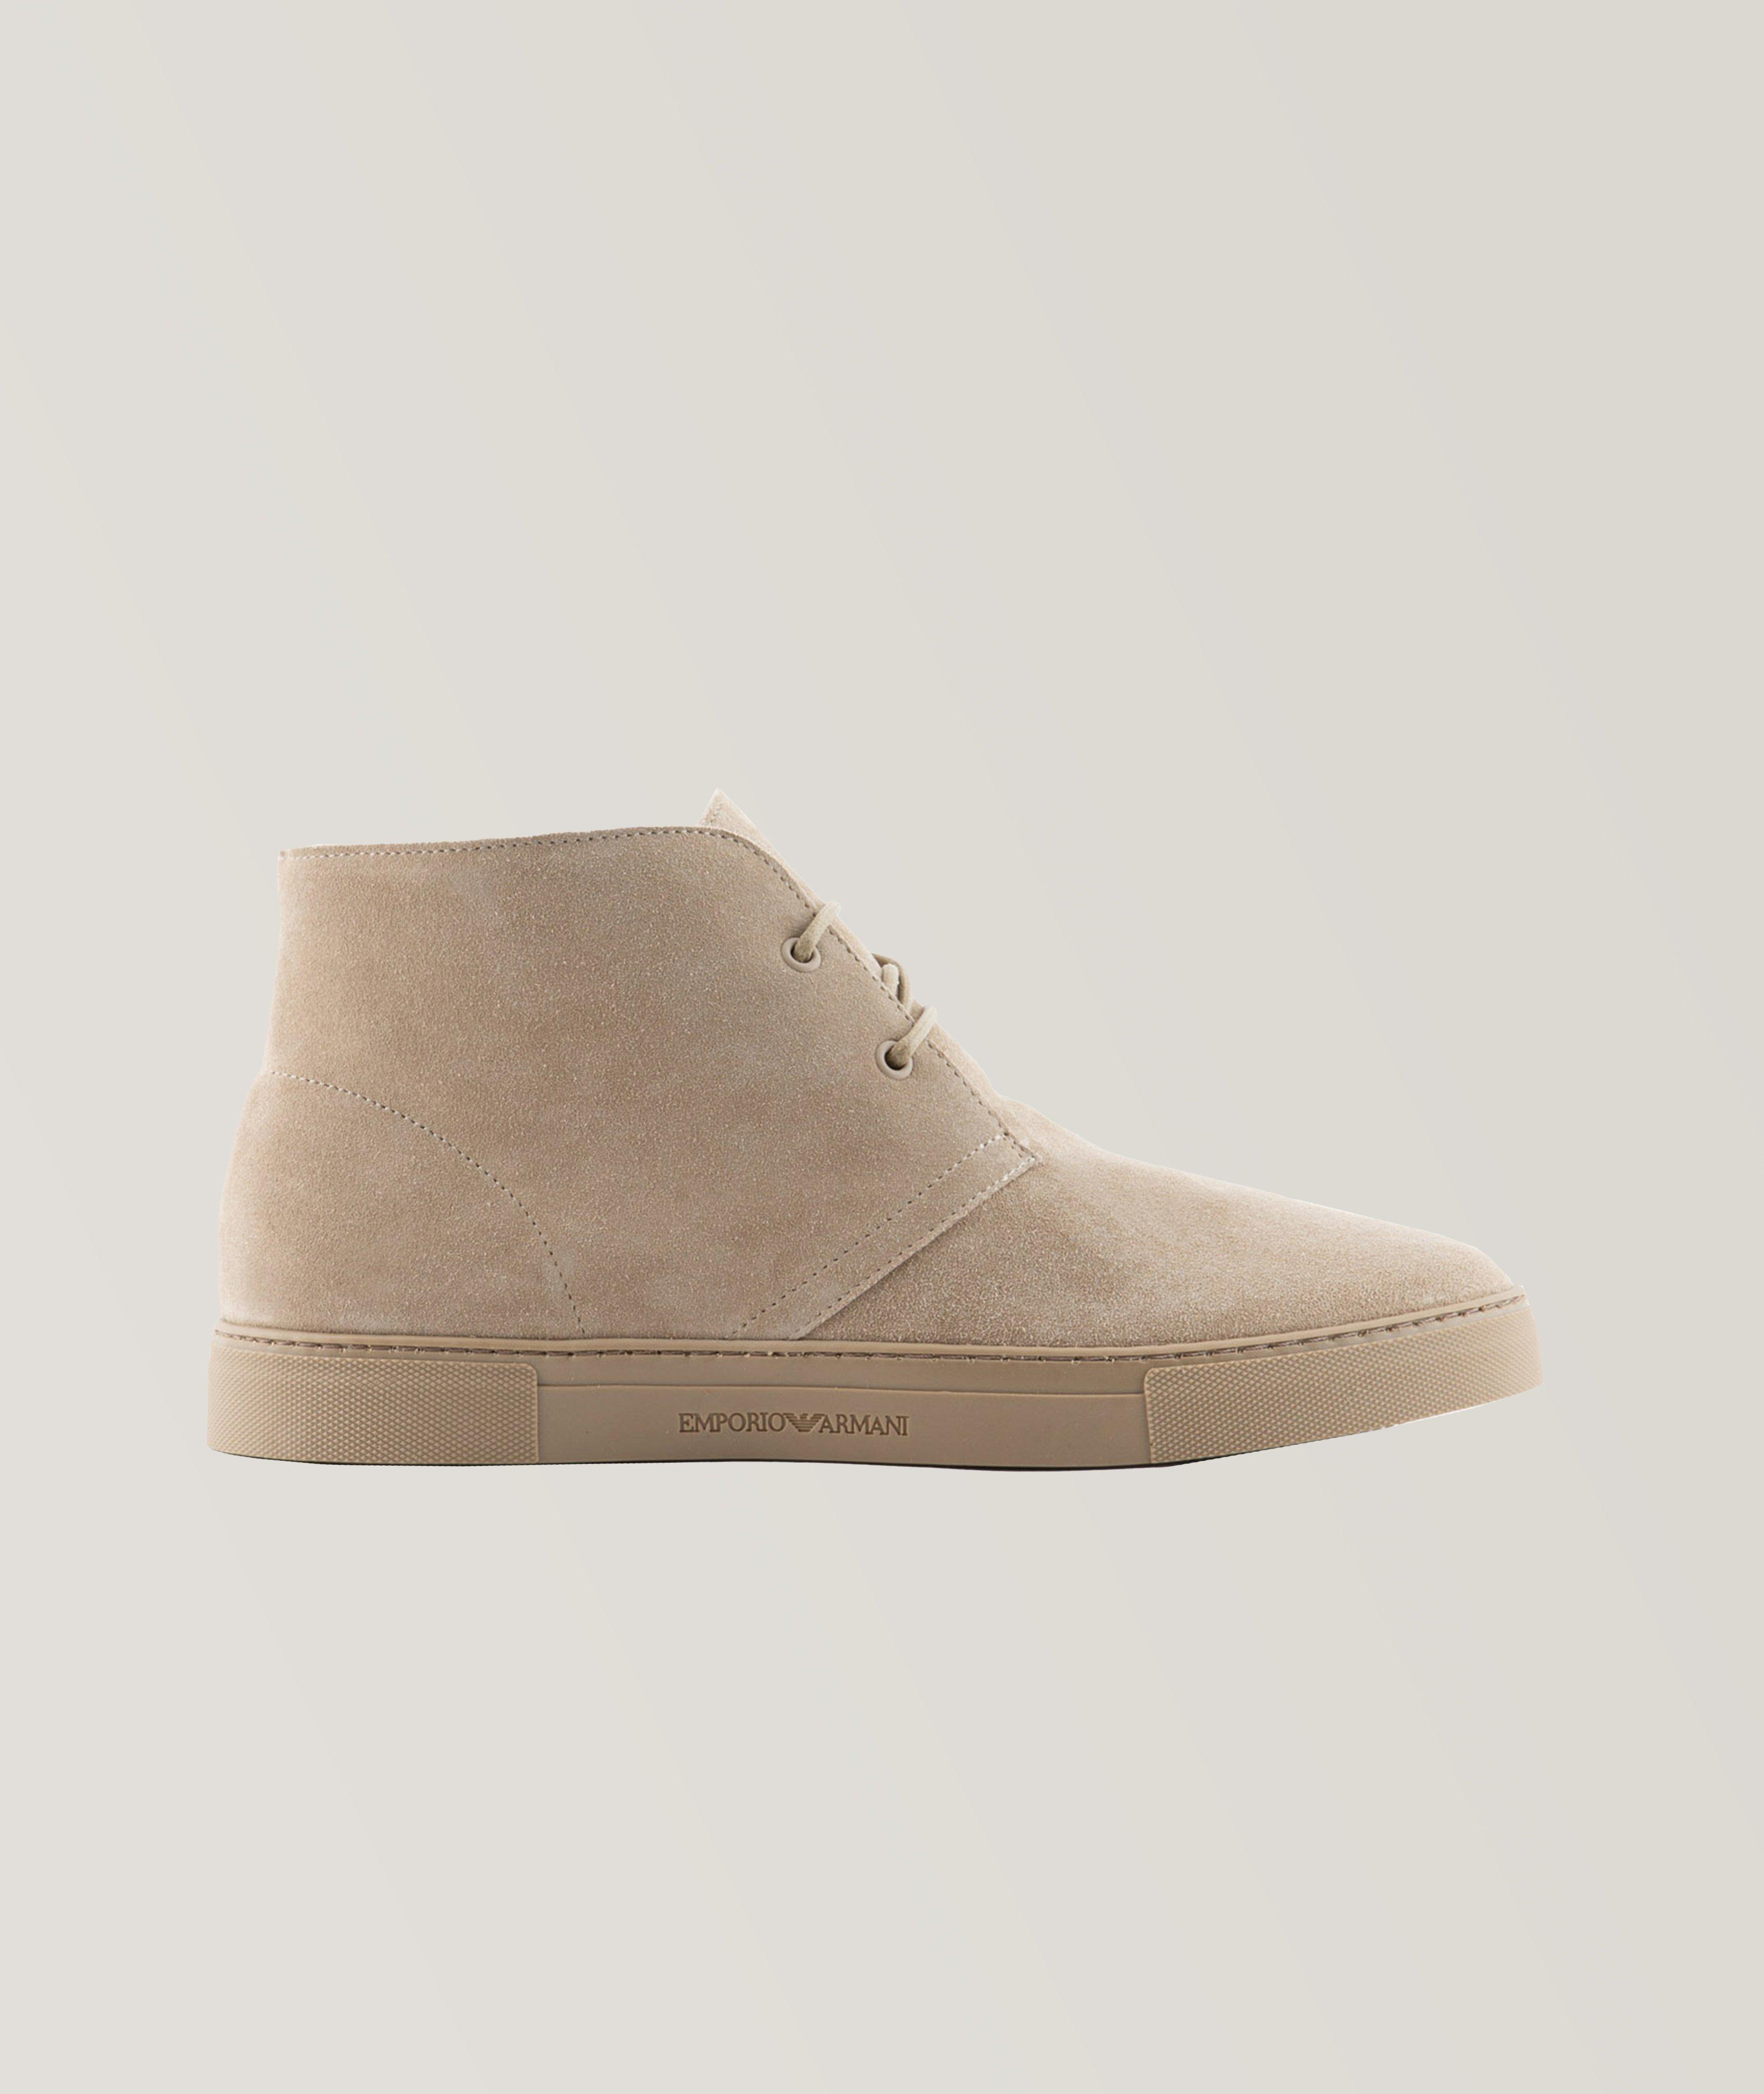 Suede Lace-Up Desert Boots image 0